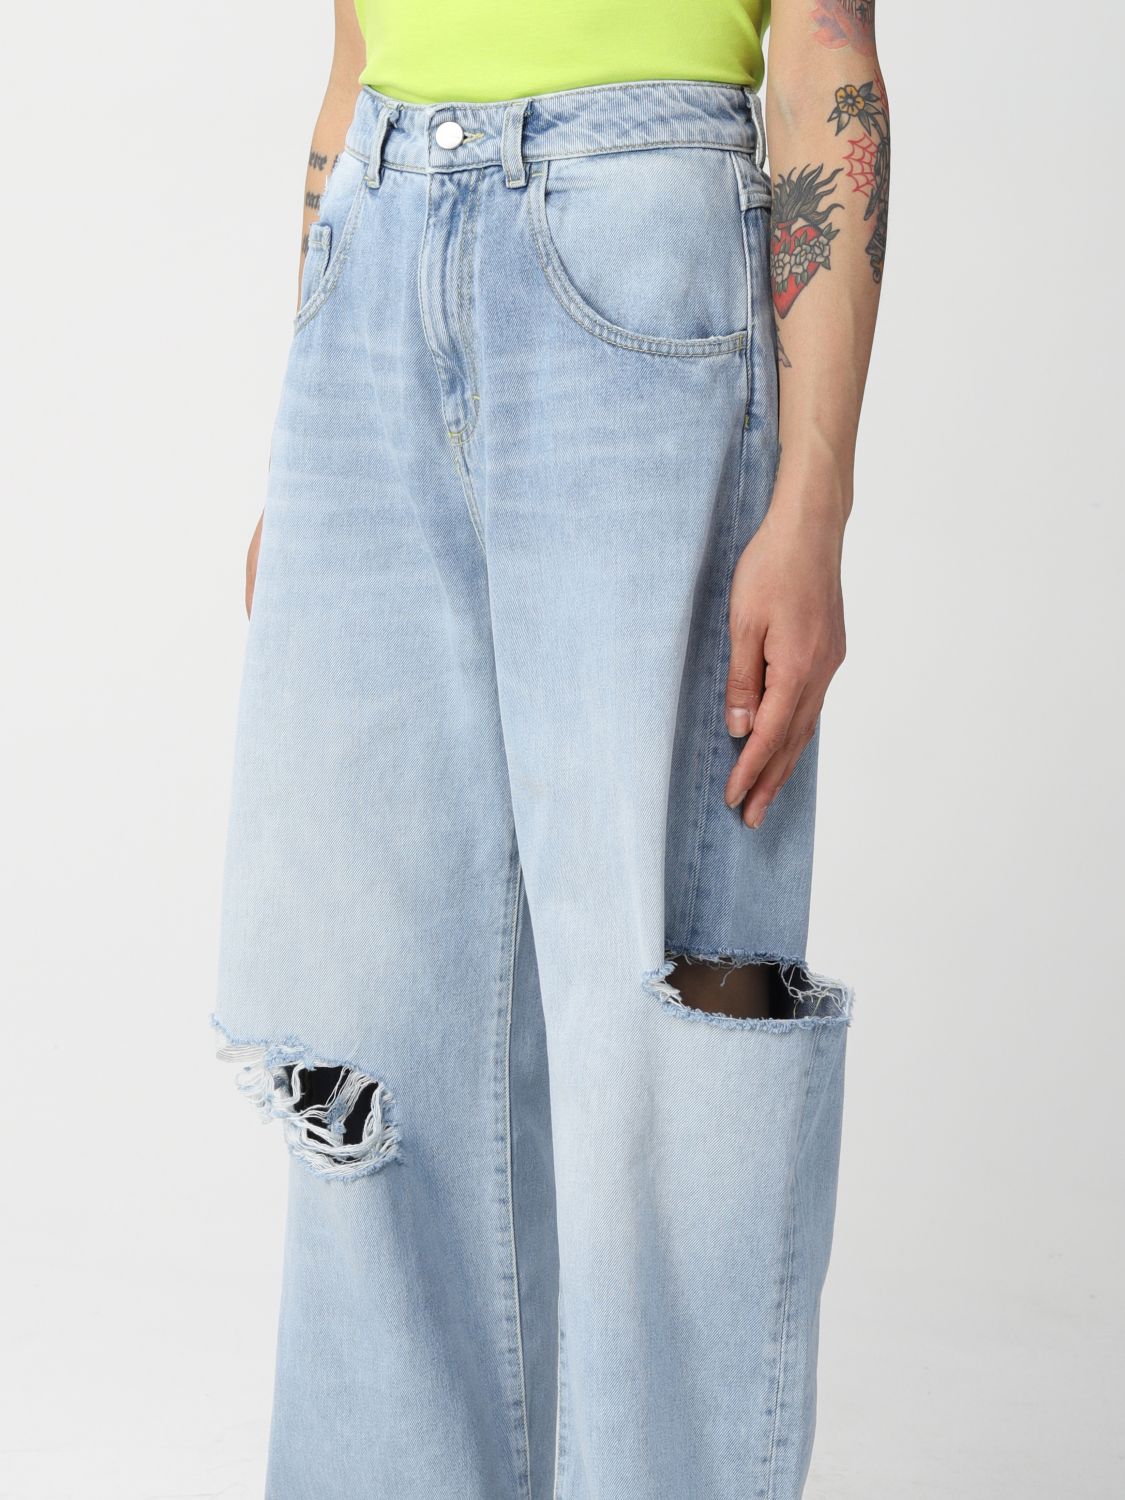 Jeans Icon Denim Los Angeles: Icon Denim Los Angeles jeans in ripped denim stone washed 3